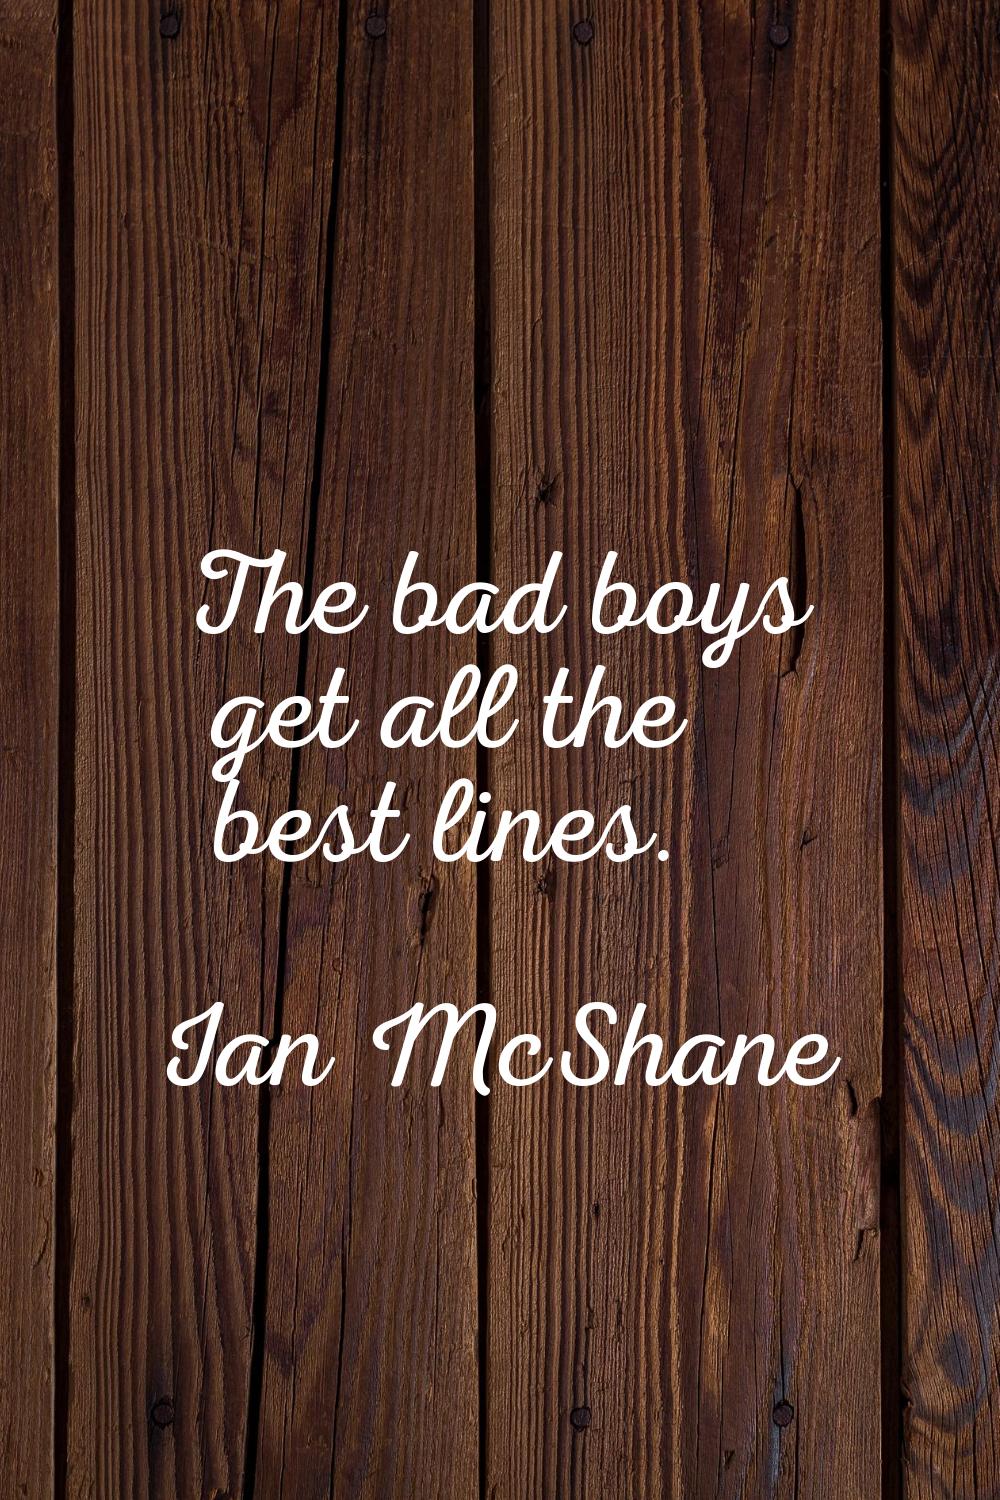 The bad boys get all the best lines.